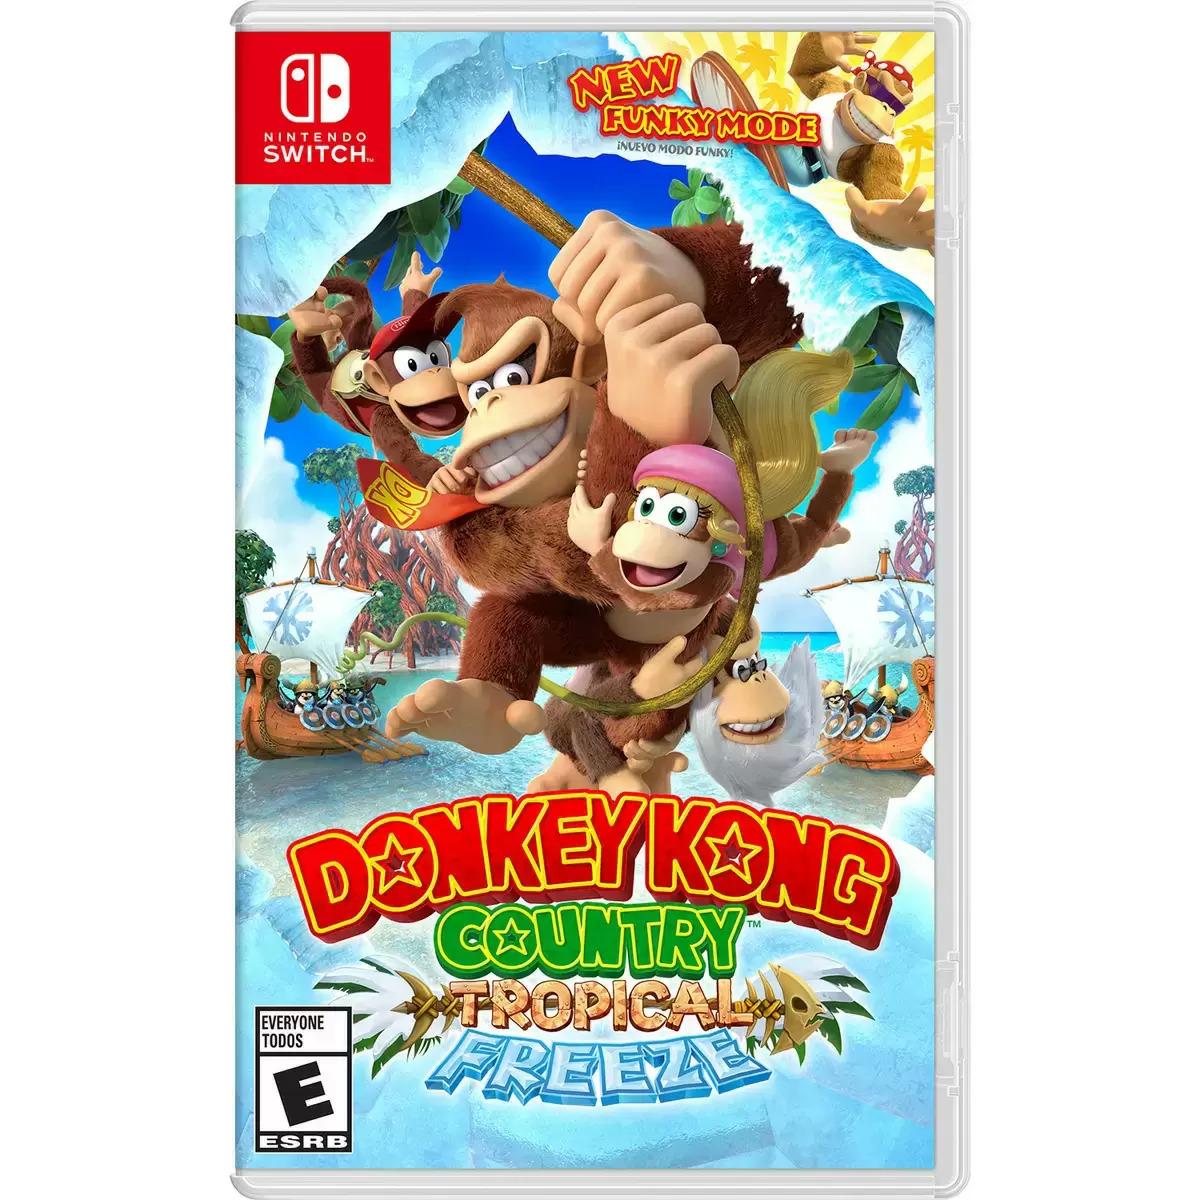 Donkey Kong Country Tropical Freeze Nintendo Switch for $39.99 Shipped